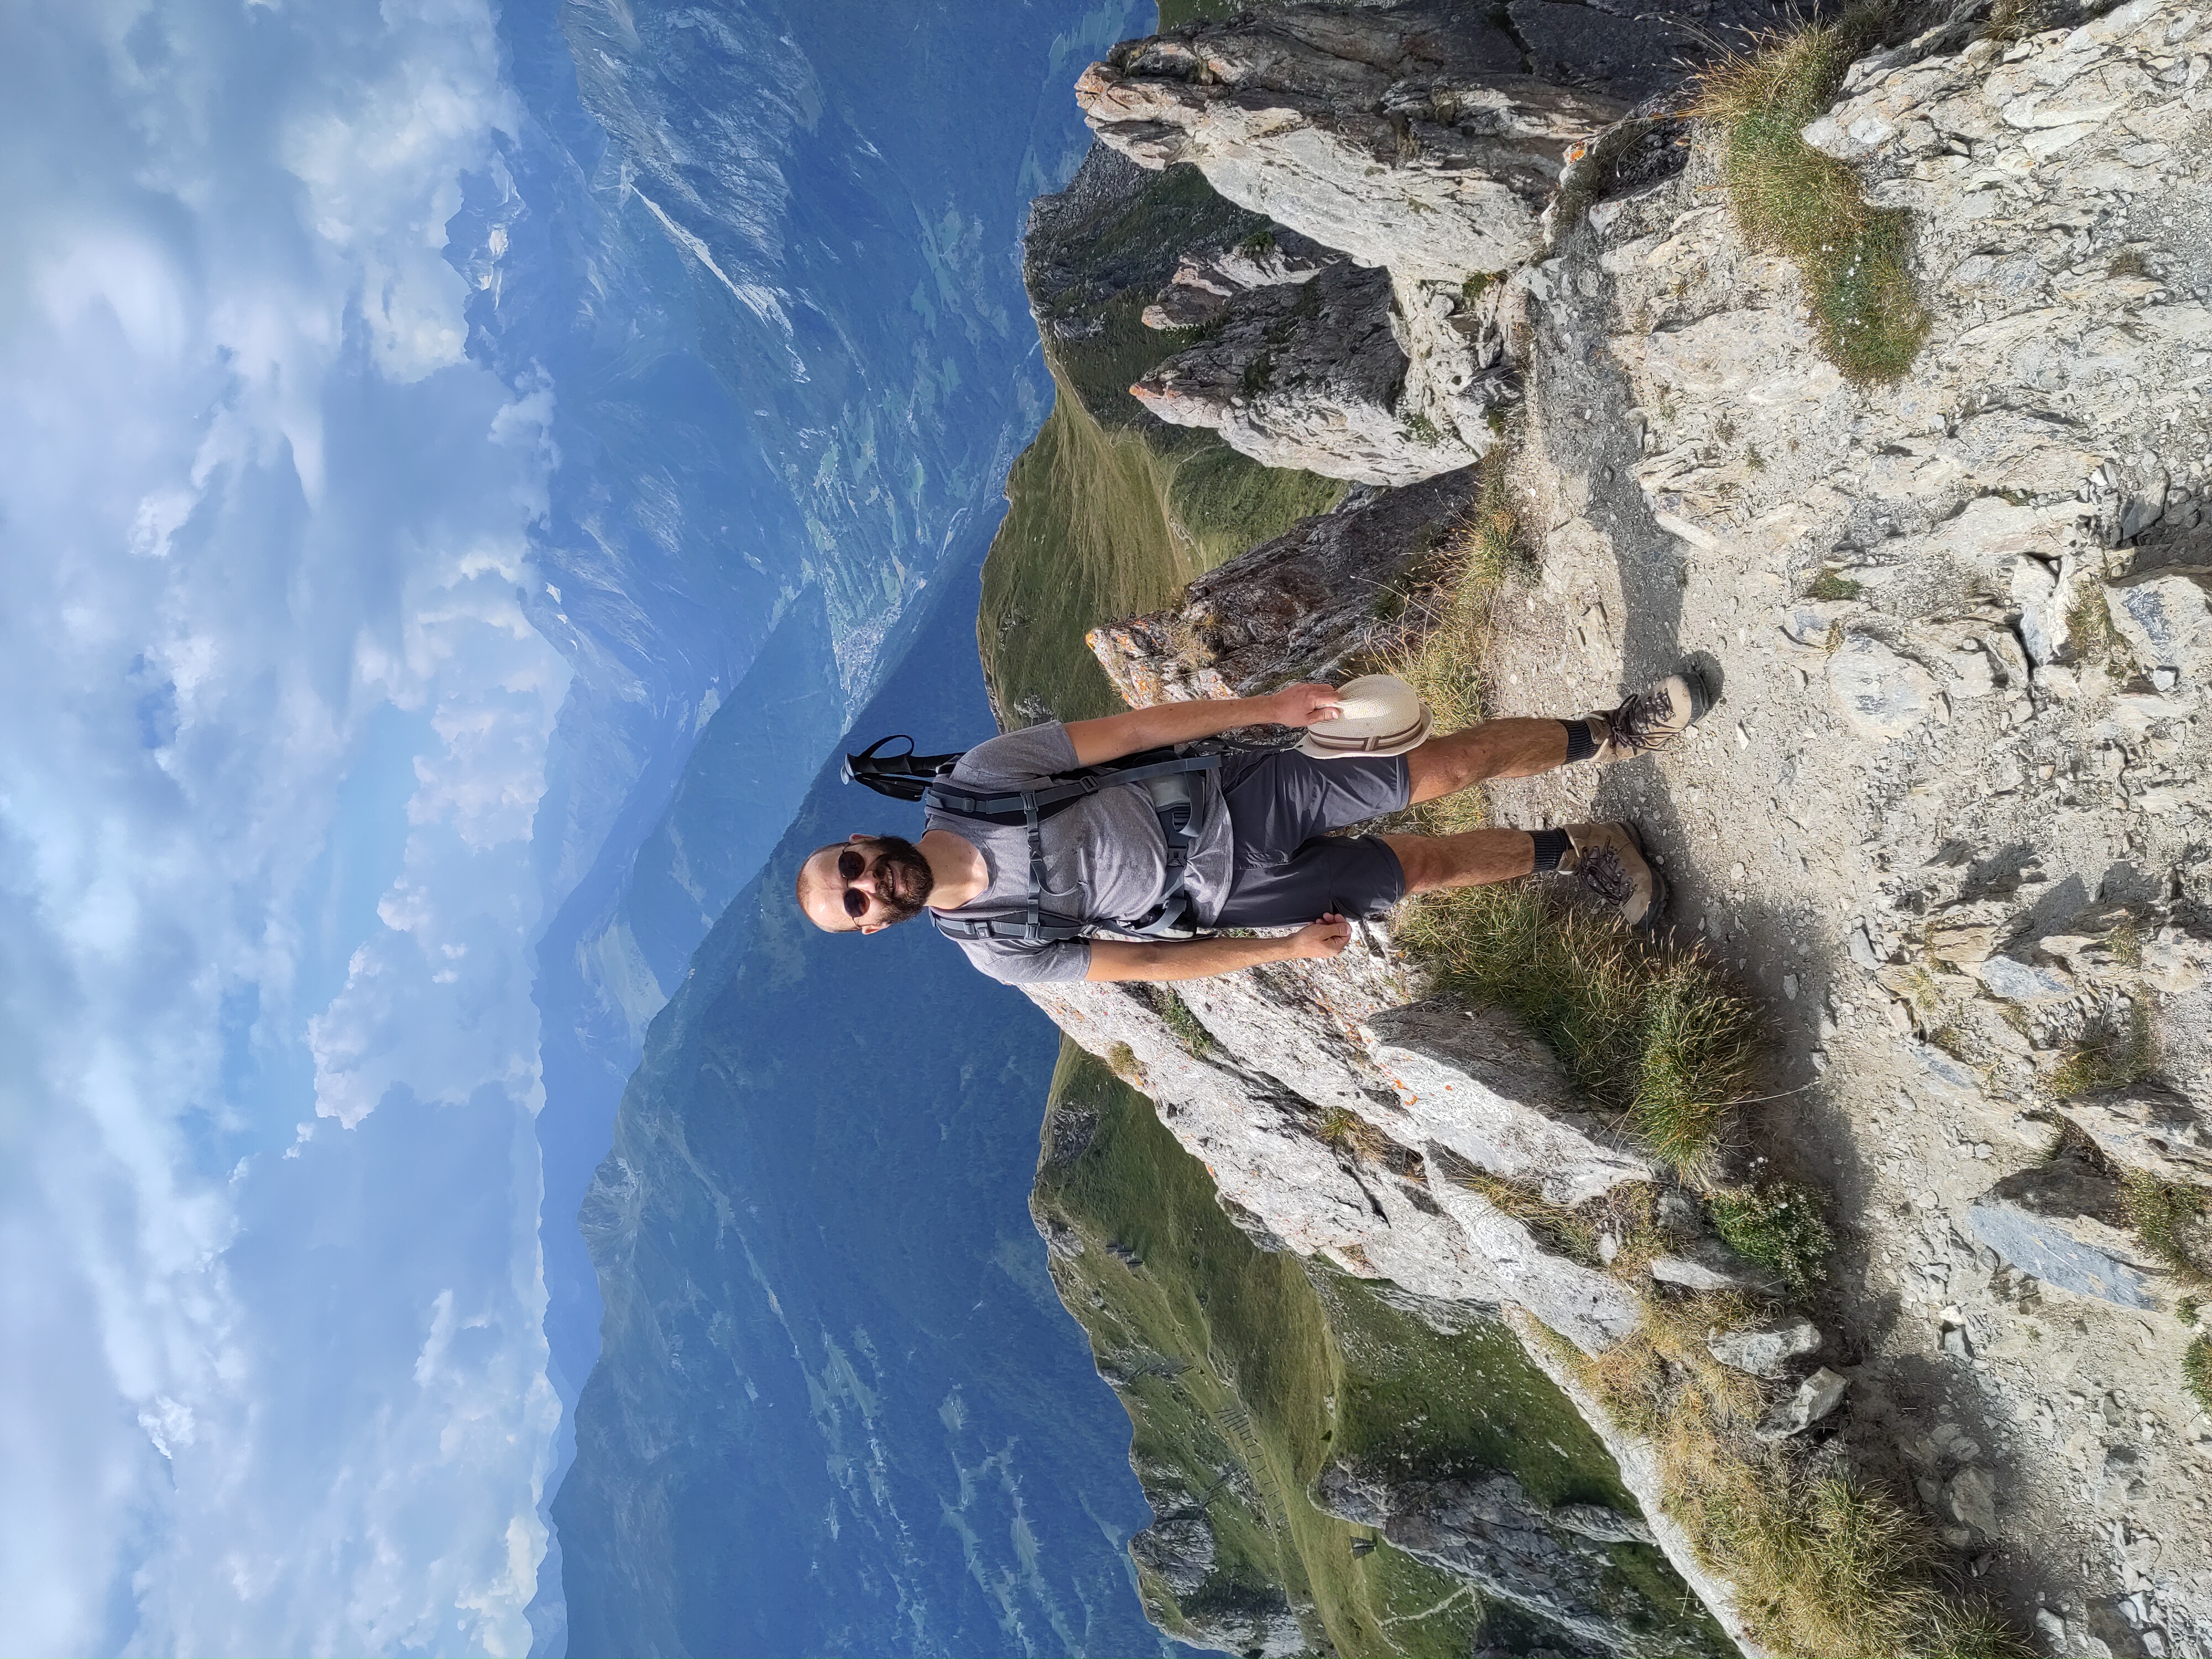 Picture of me in the Swiss mountains - thanks to Nicolas O'Connell